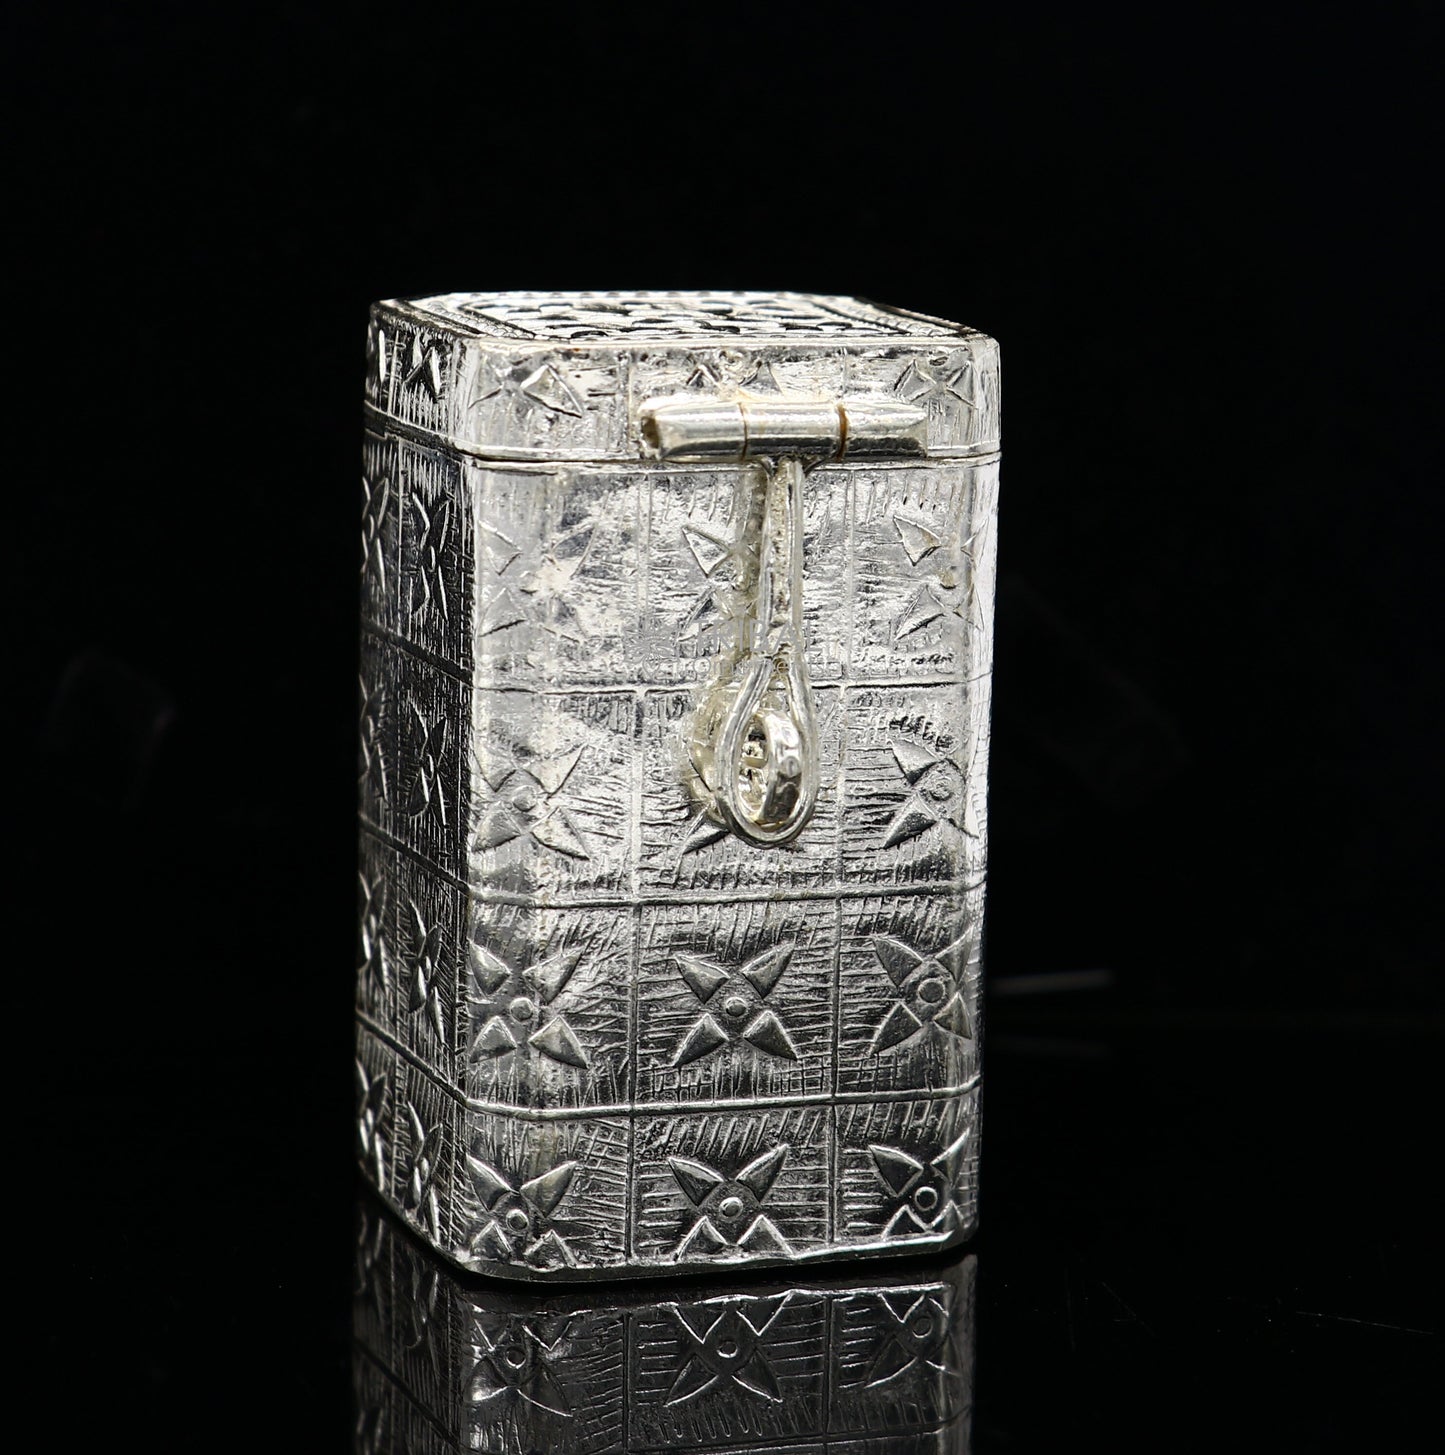 2.2" 925 silver utensils vintage style trinket box, container/casket box bridal floral work box, jewelry box silver utensils stb769 - TRIBAL ORNAMENTS